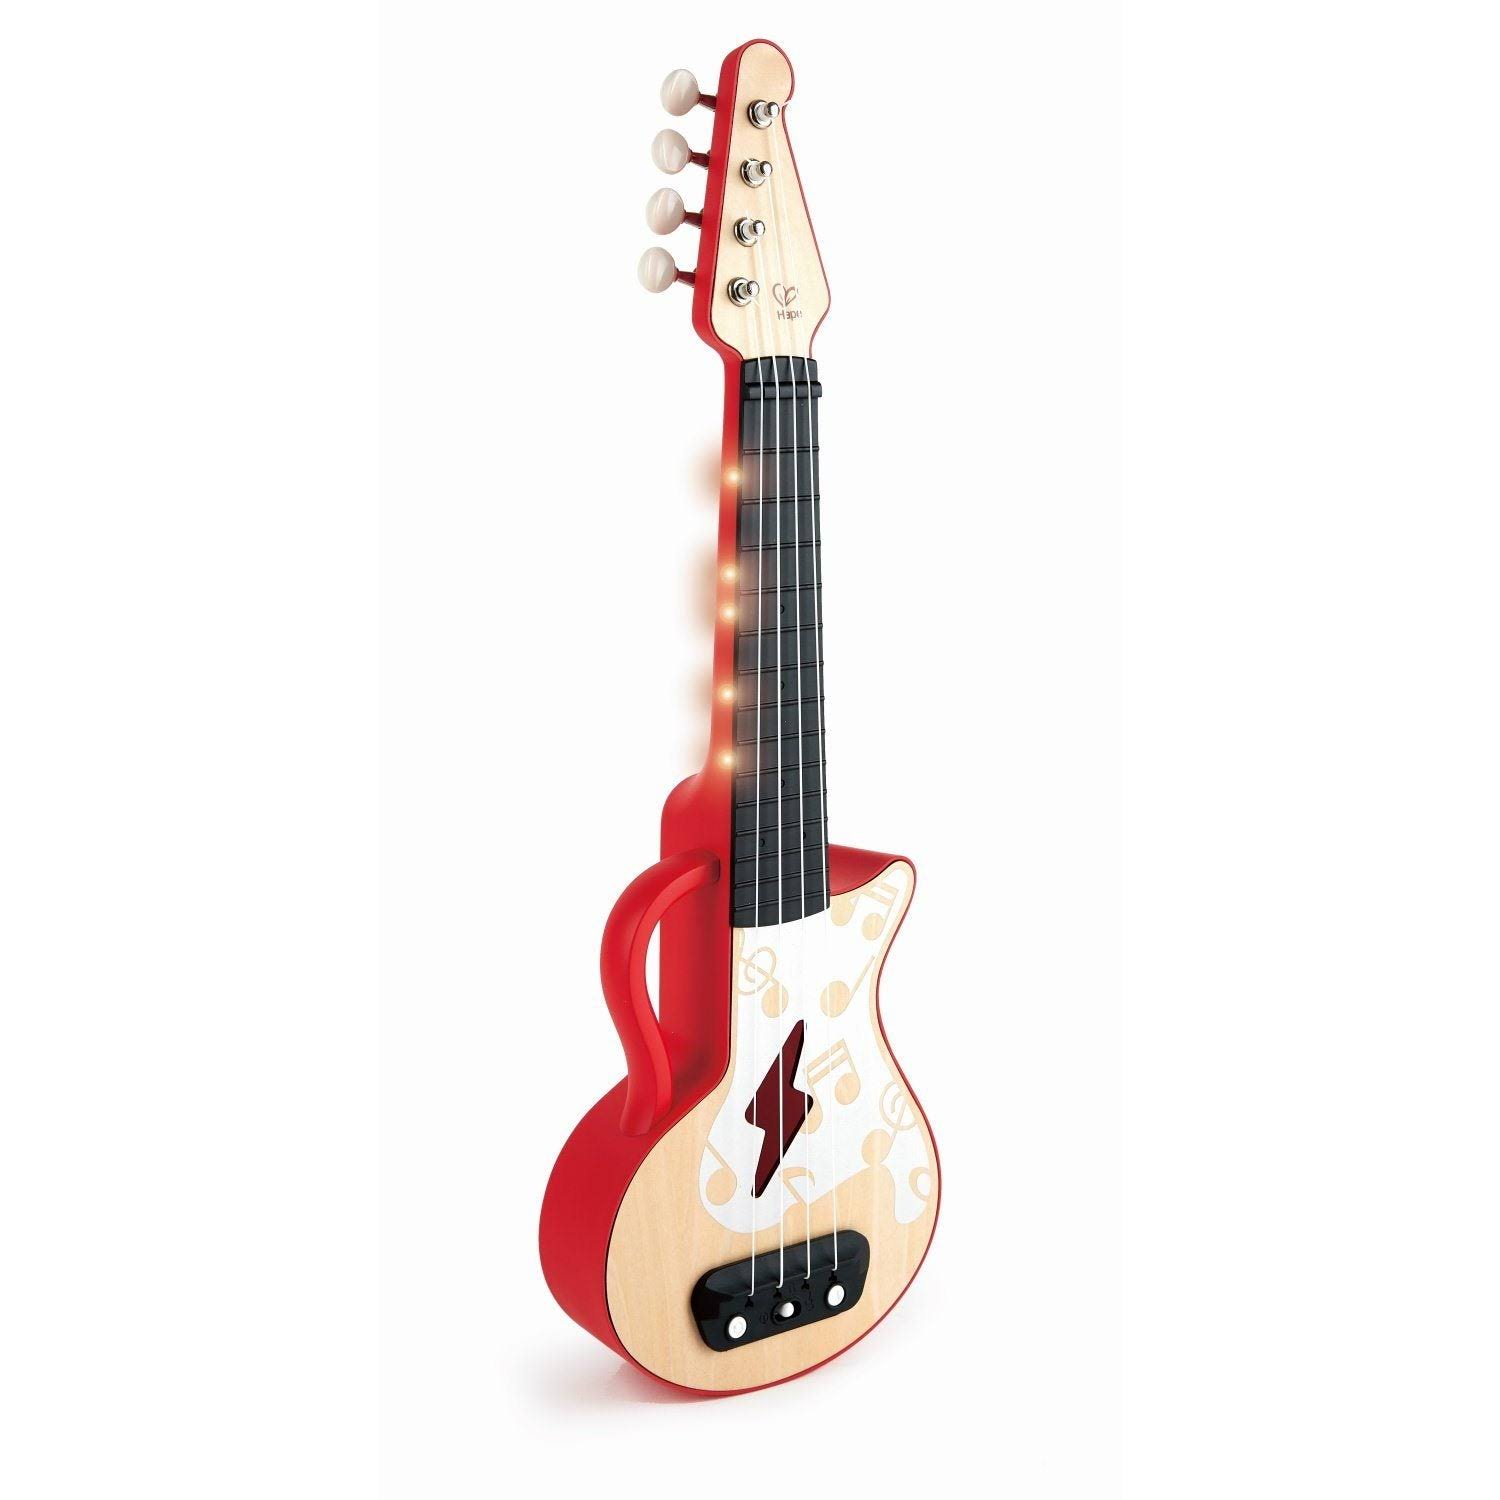 Hape Learn with Lights Electronic Ukulele Red | Leaning and Band Mode | Musical Instrument